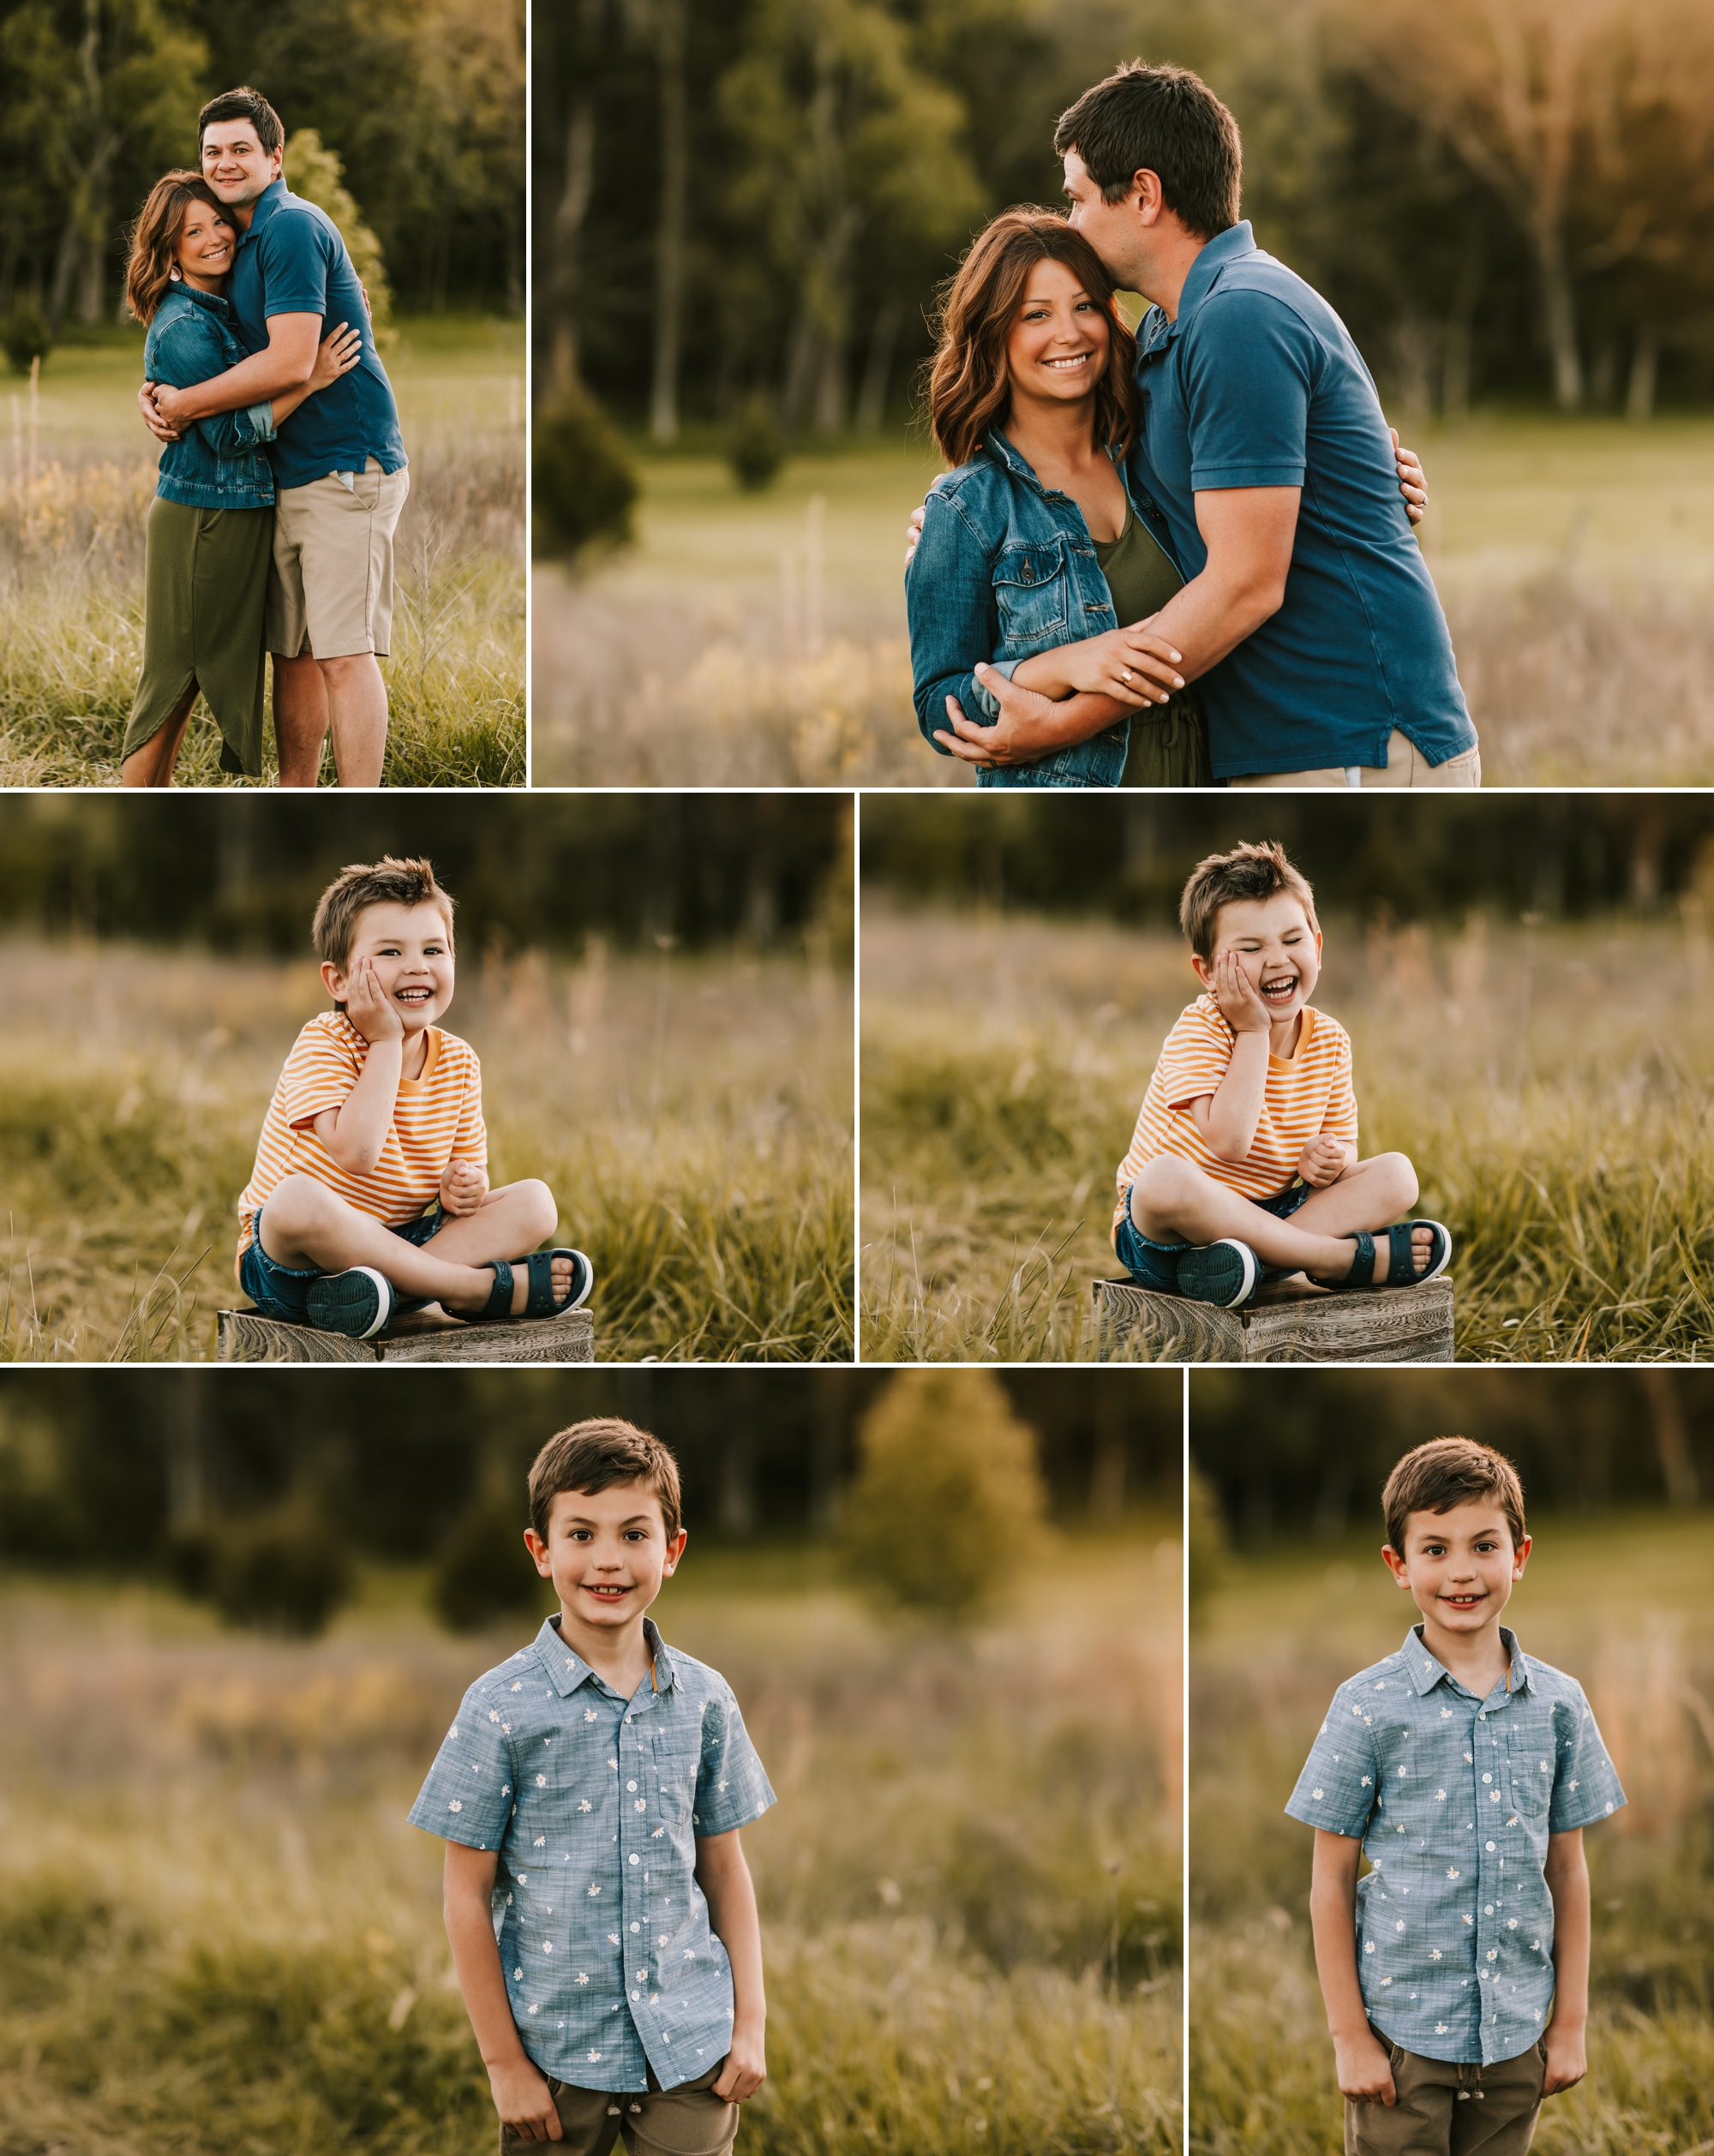 sunset outdoor session family kids grassy area smiles laughing photographer 63090